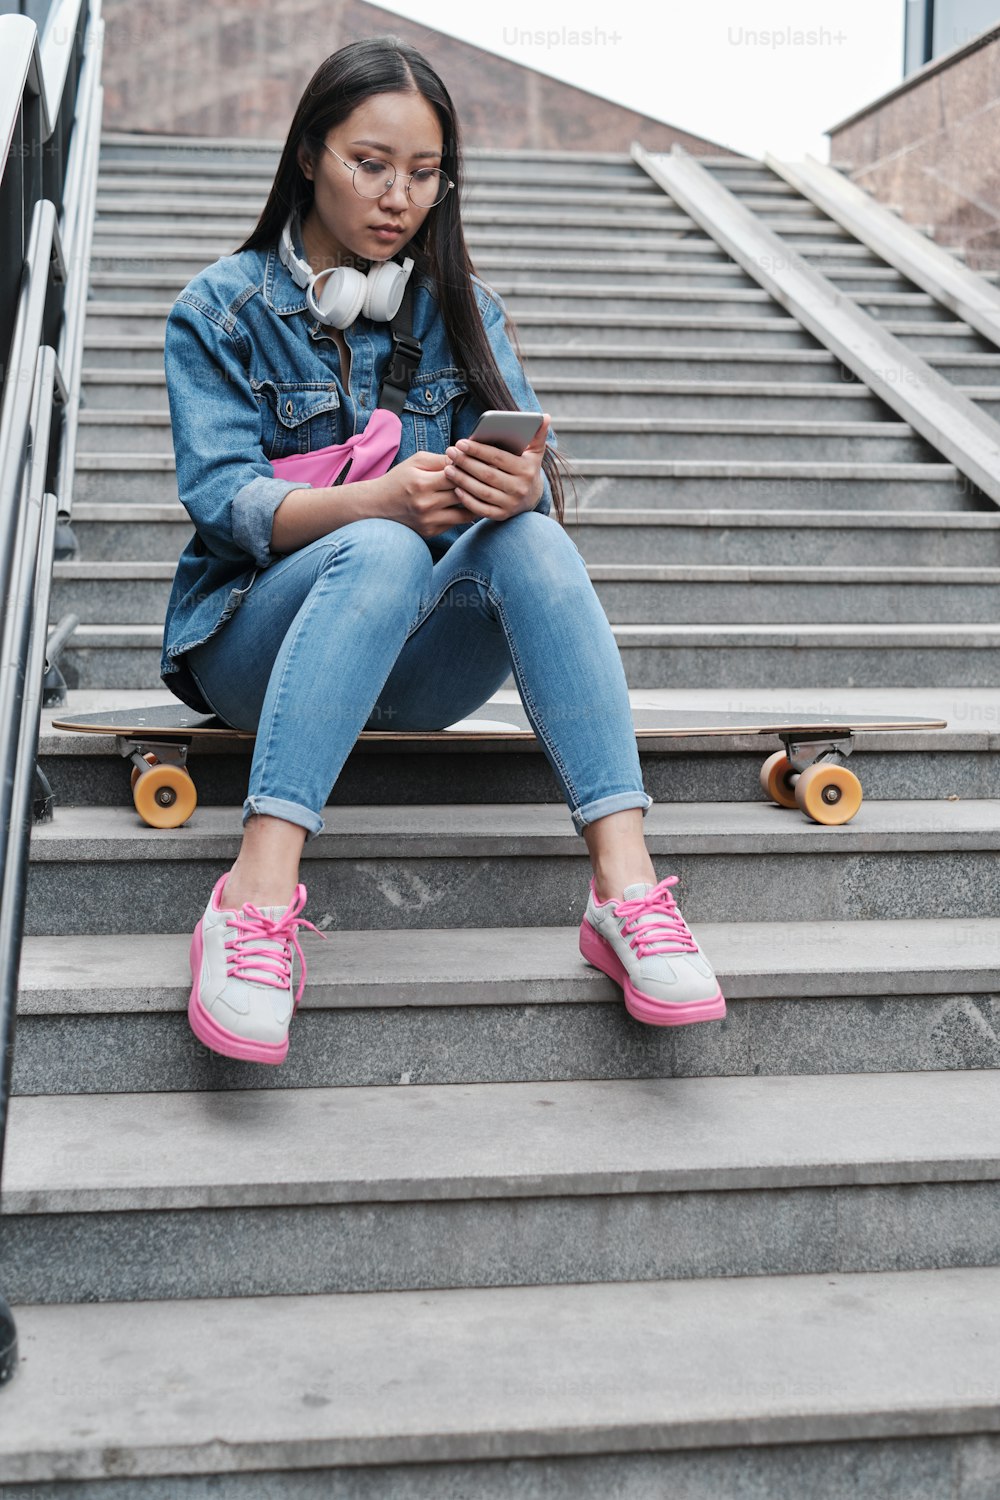 Girl with a longboard sits on the stairs and looks at her phone screen.